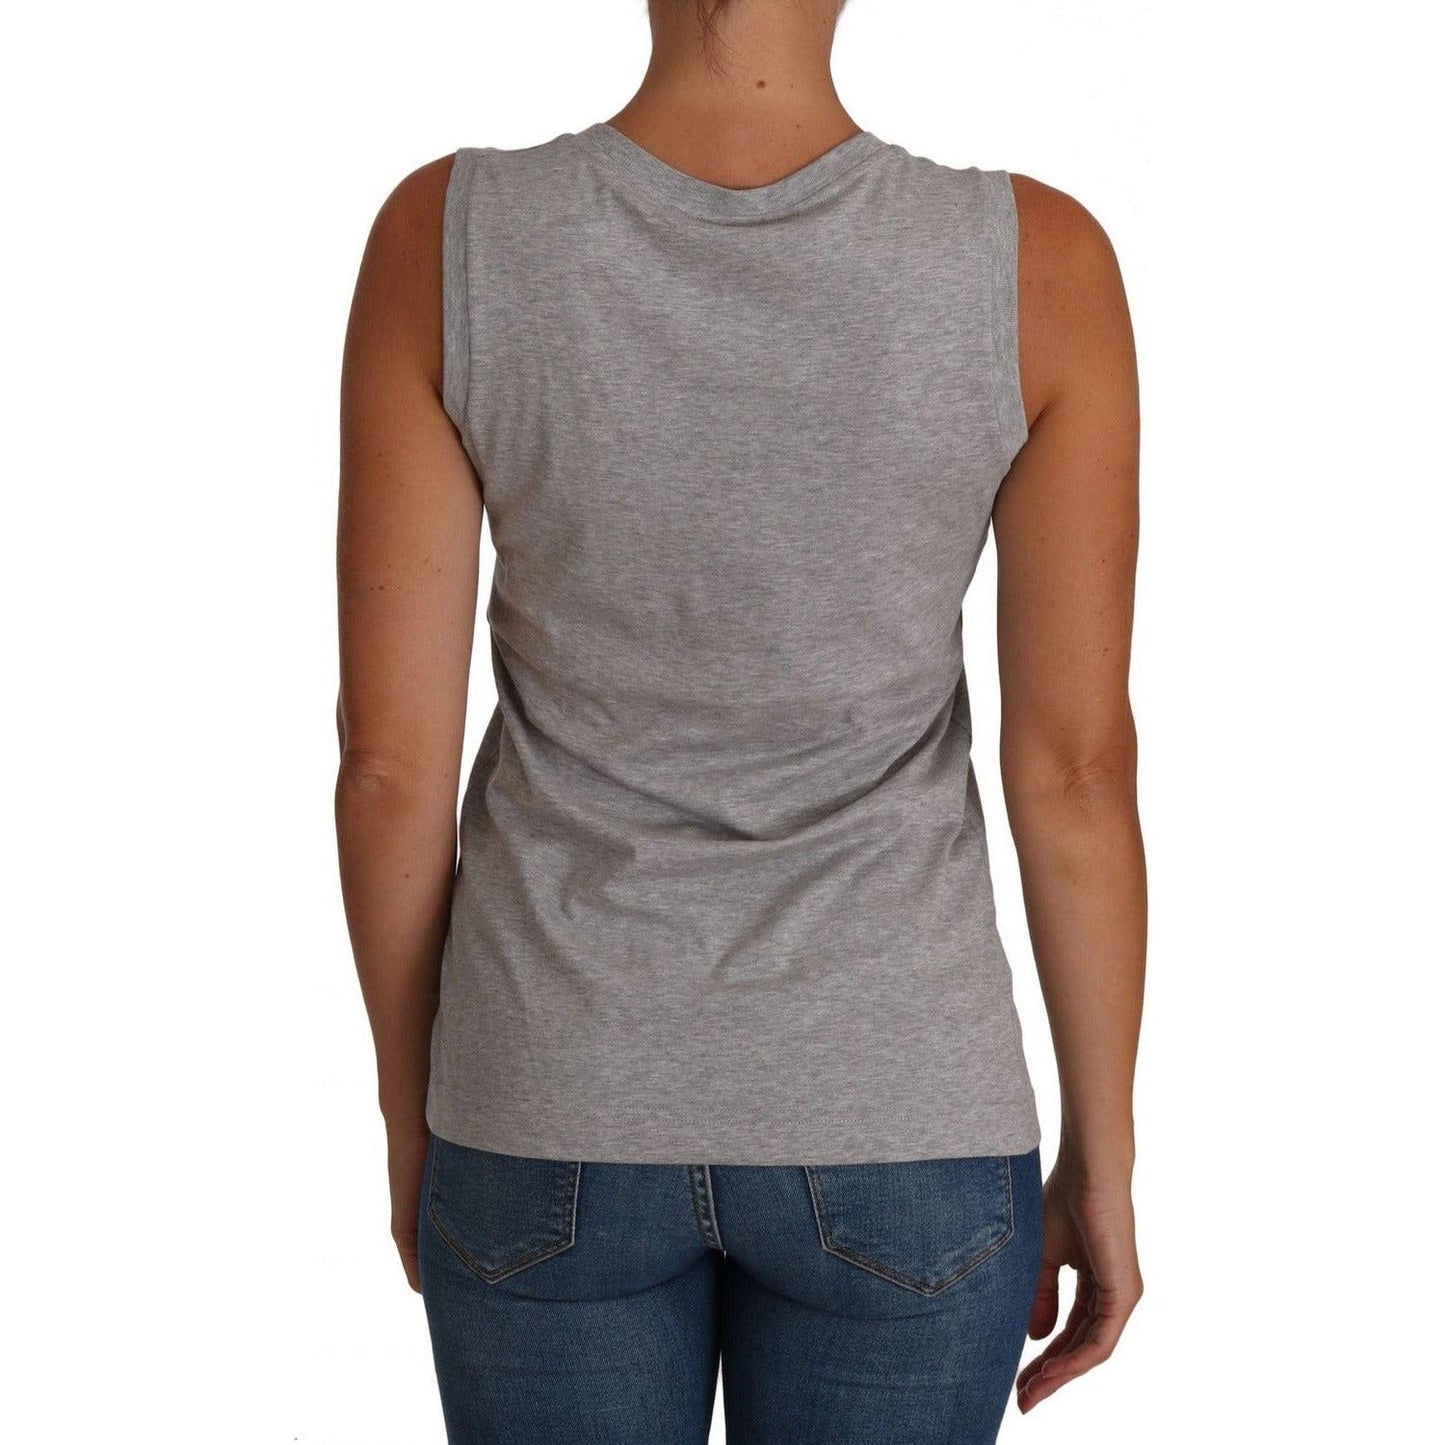 Dolce & Gabbana Elegant Sleeveless Lace Embroidered Top gray-and-white-cami-tank-gray-love-cotton-top